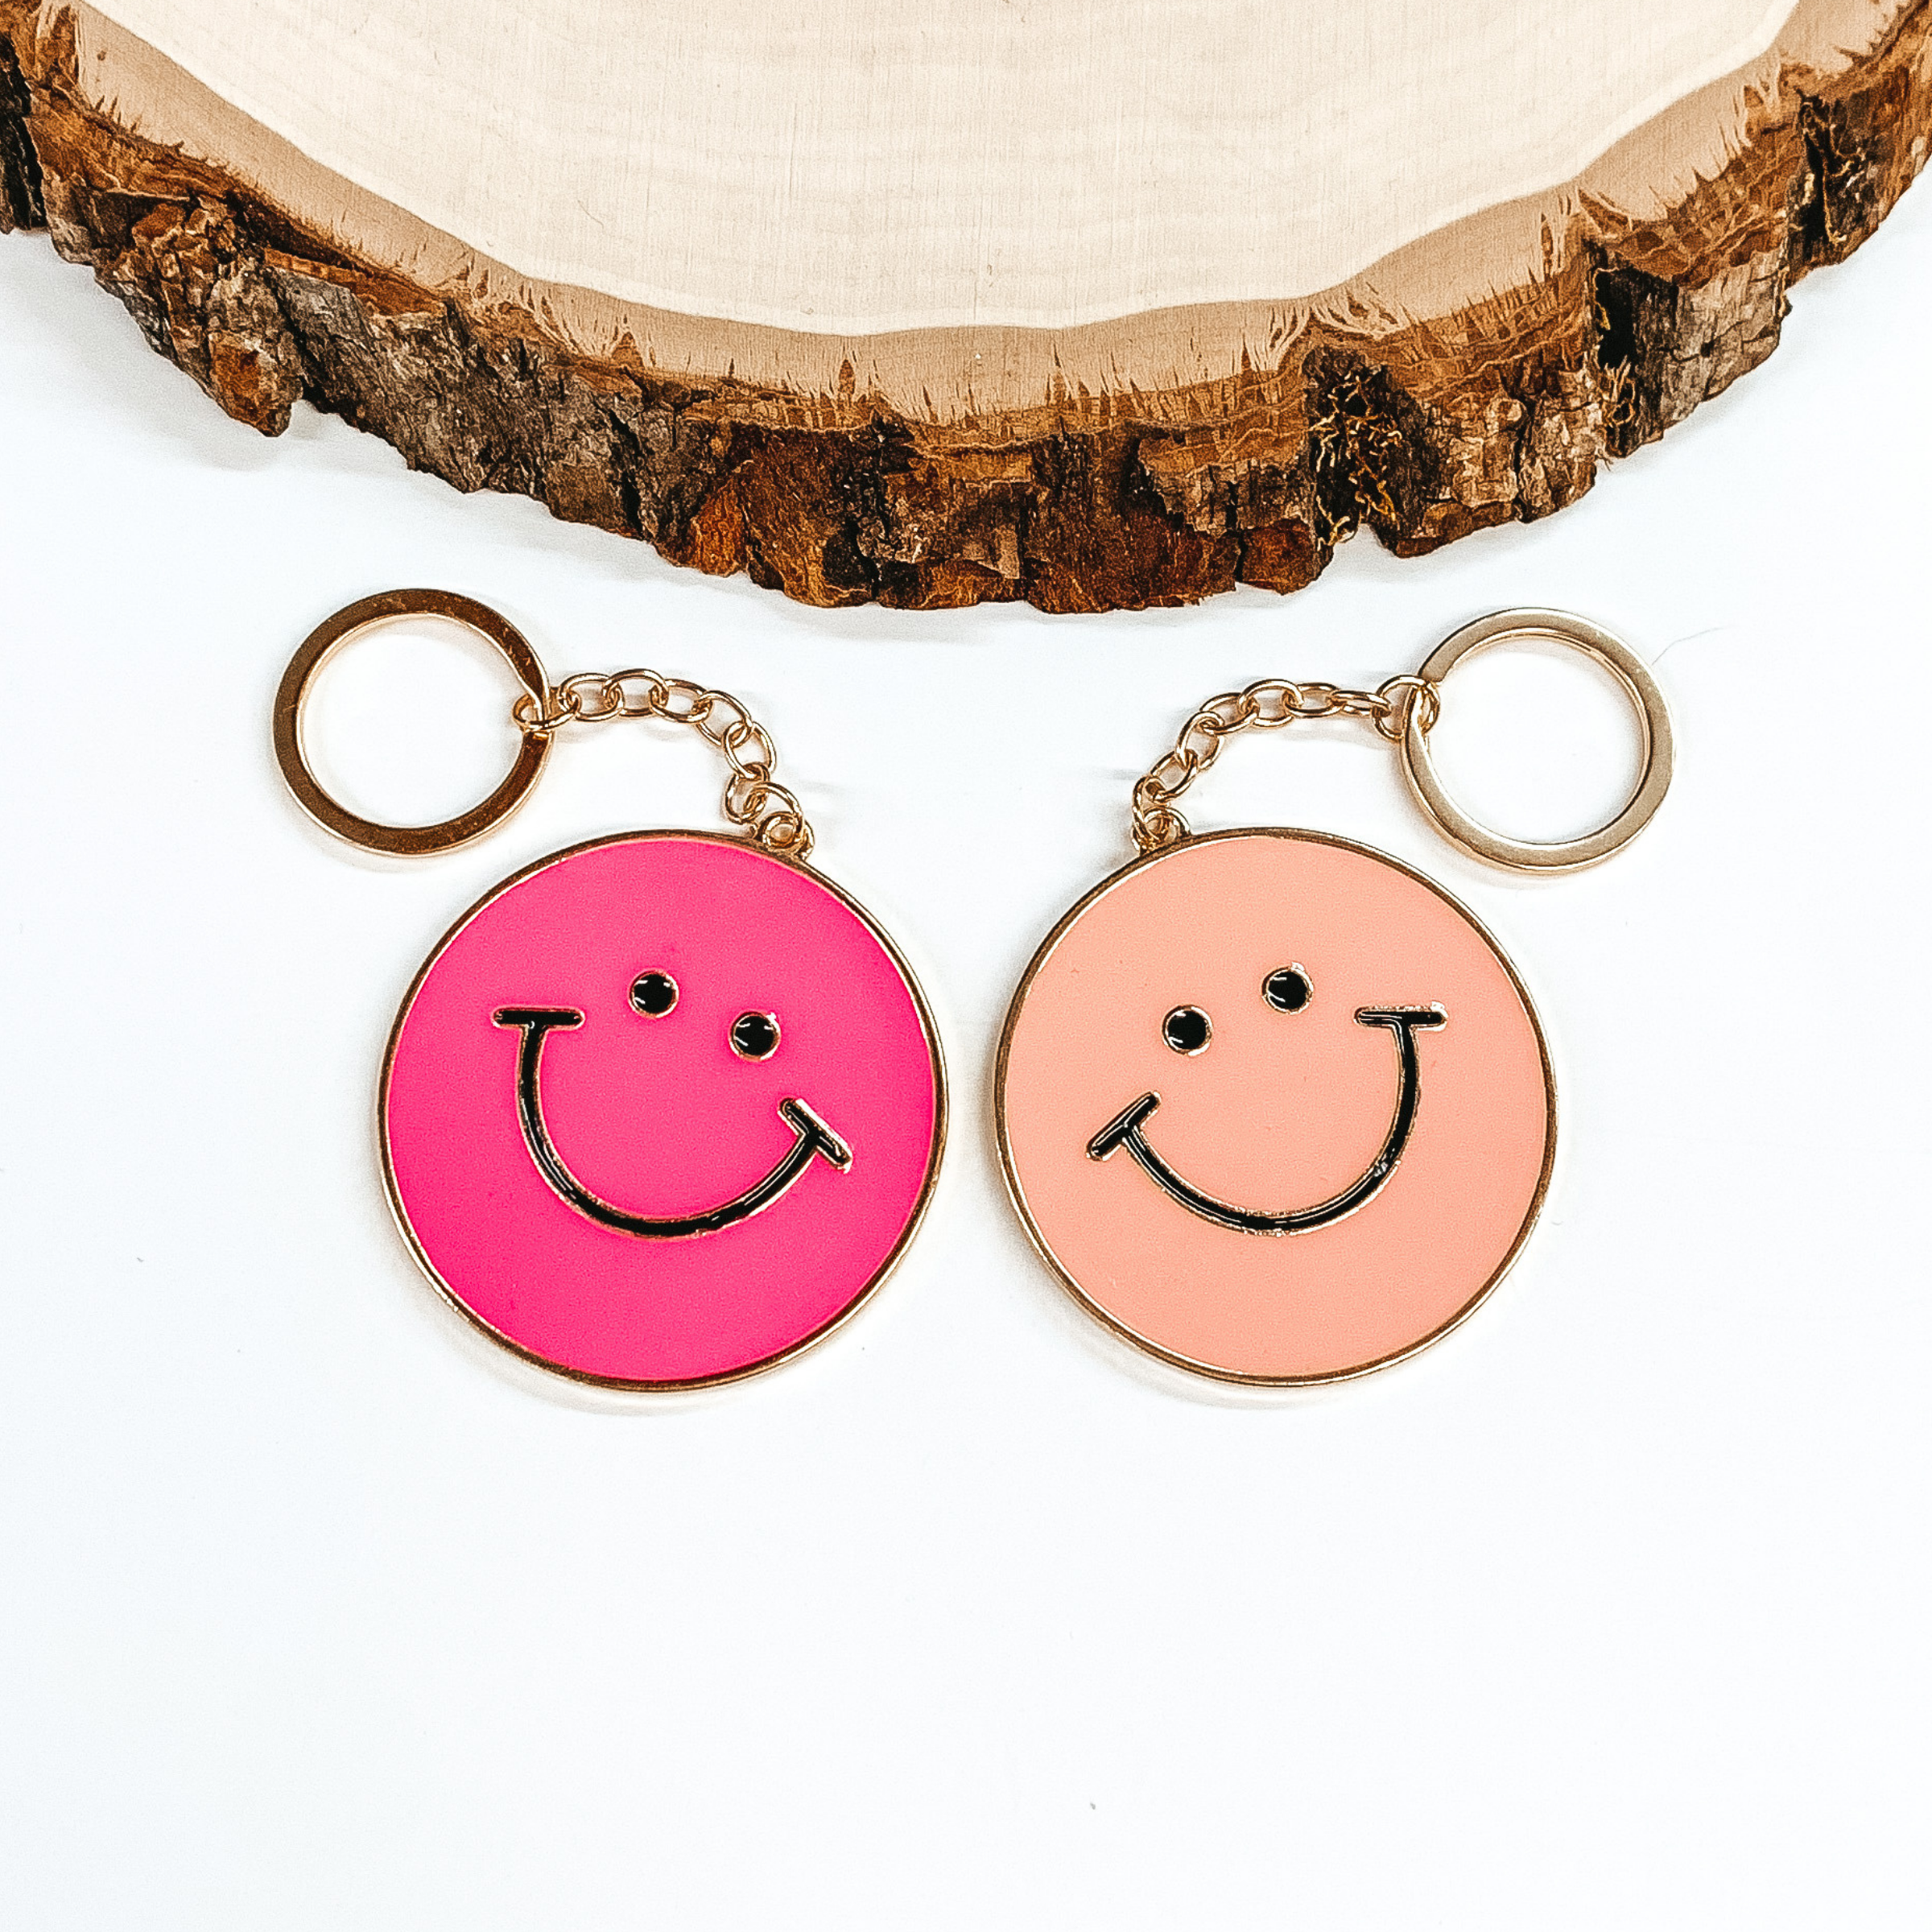 Circle Pendant Key Chain with Happy Face in Pink/Hot Pink - Giddy Up Glamour Boutique